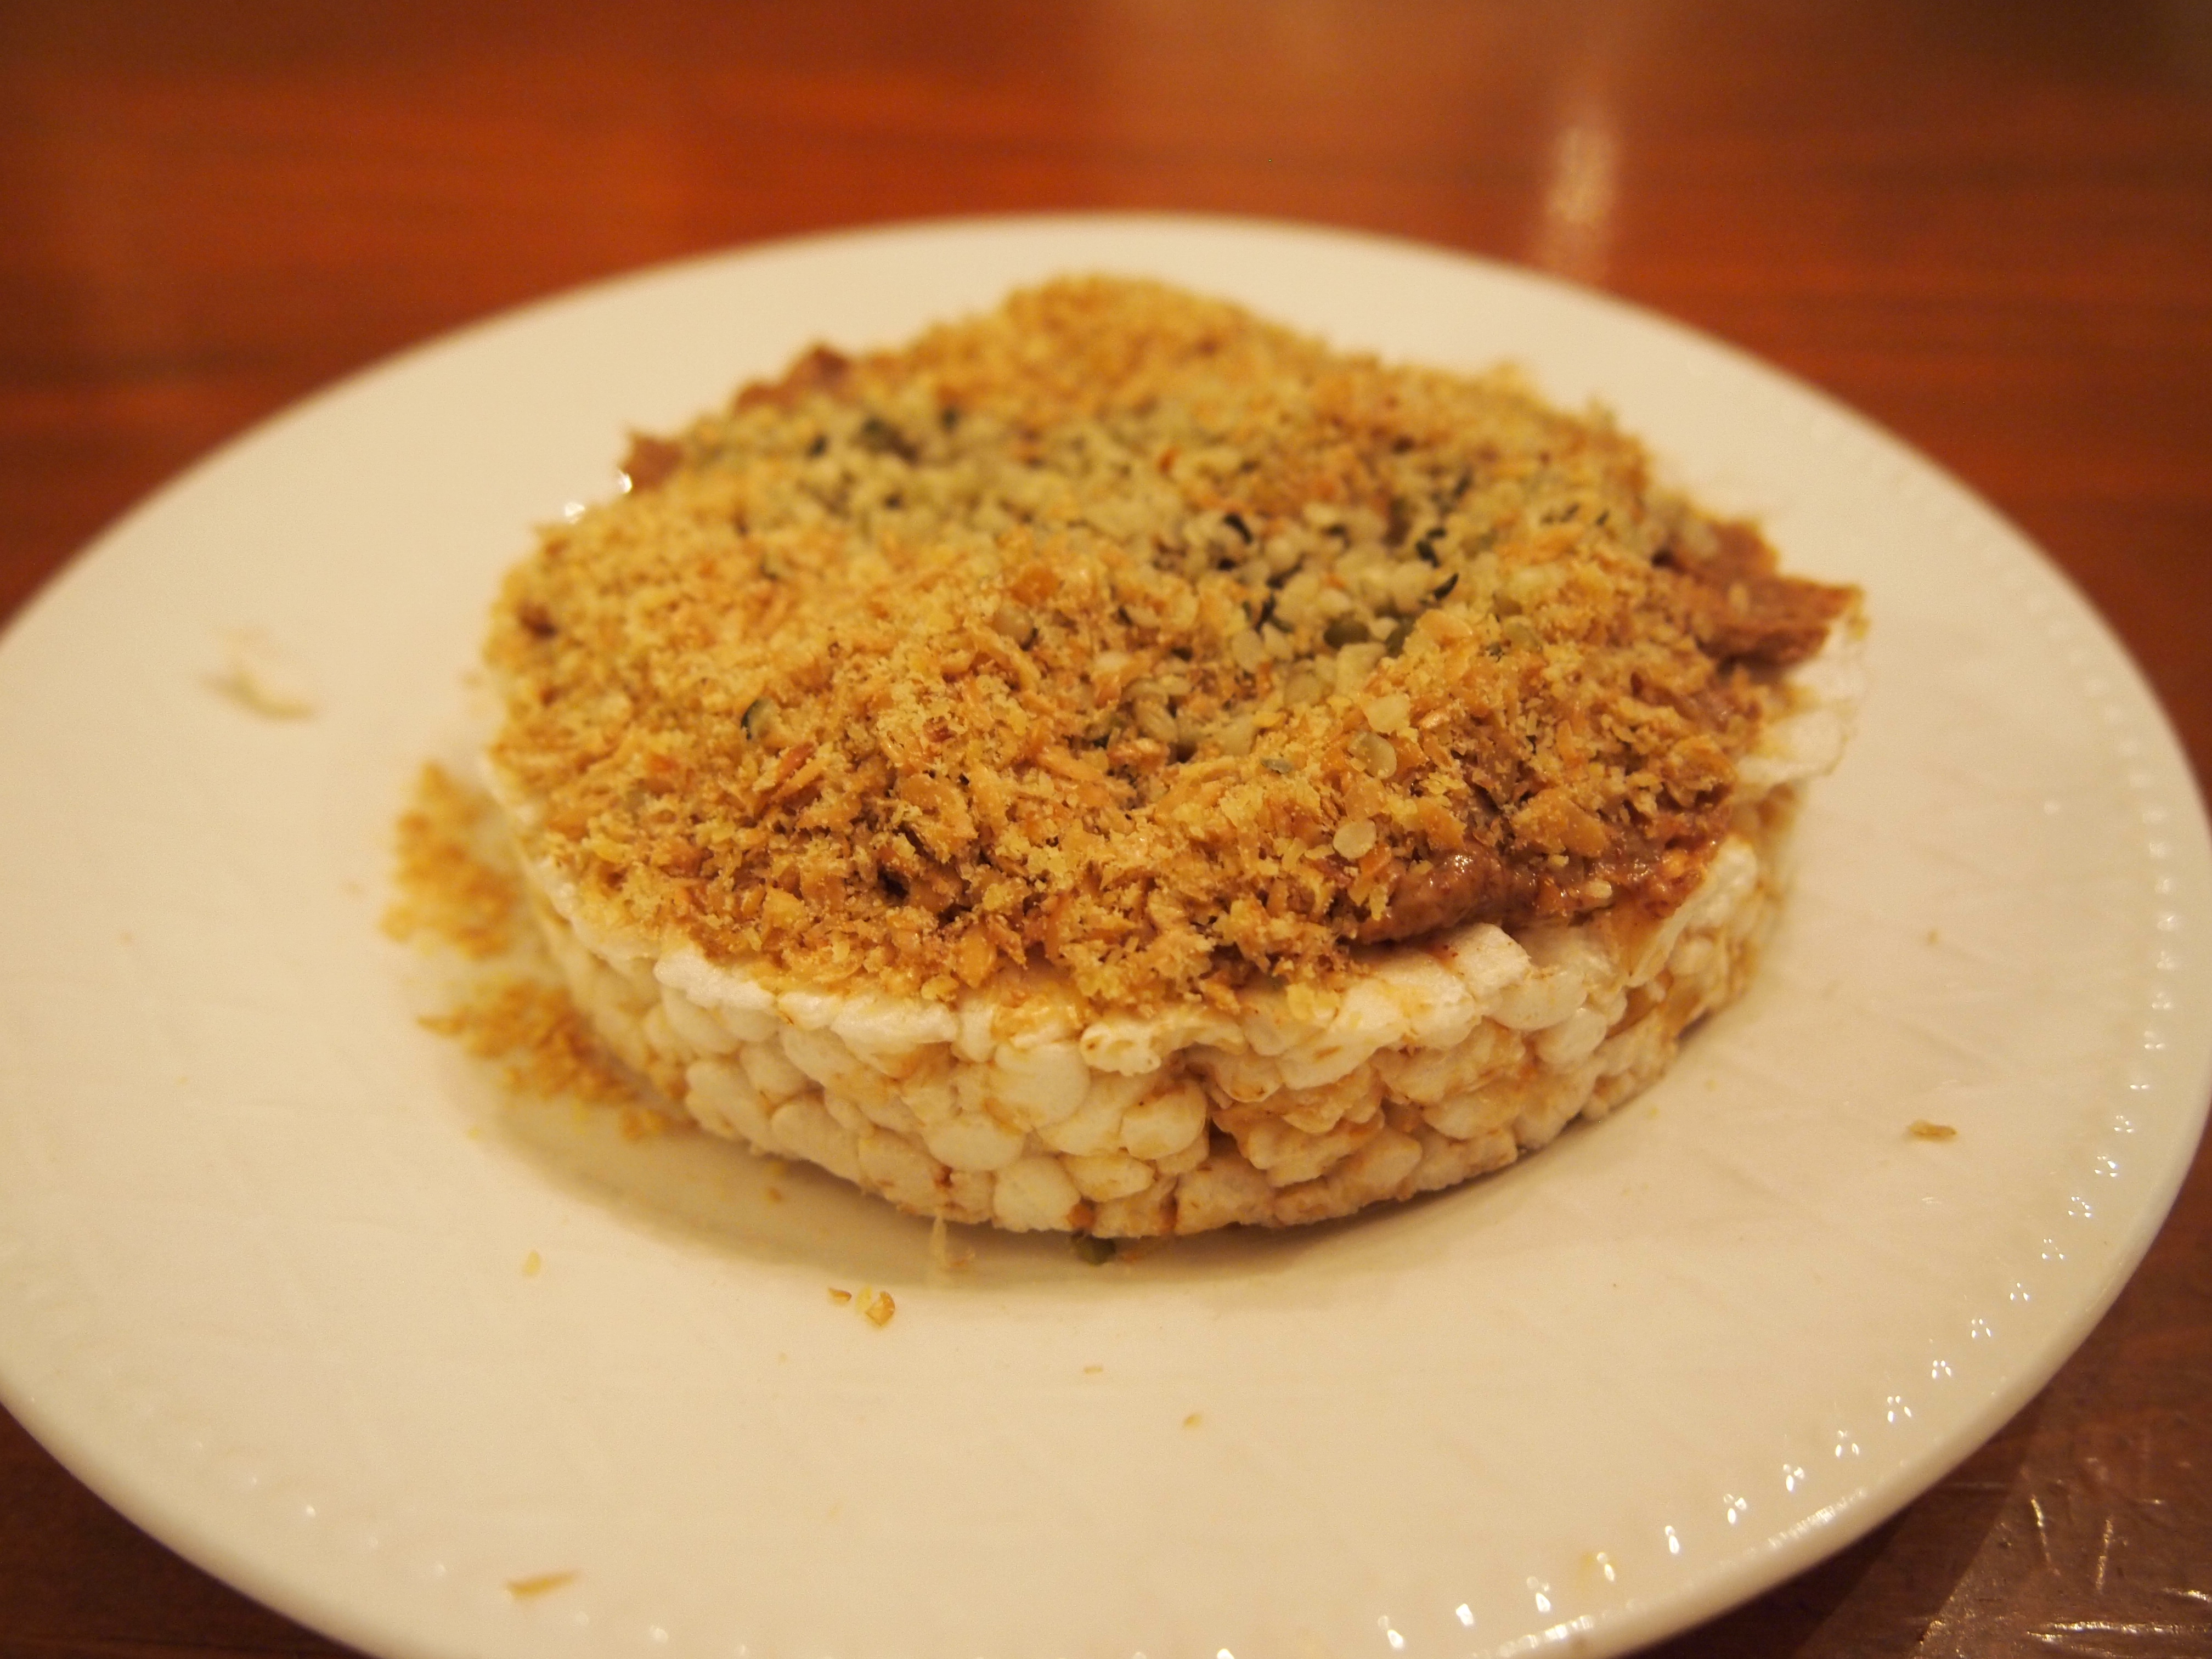 Mid-morning snack #3 - Rice cake, almond butter, Hemp Hearts & Ground Flax Seeds